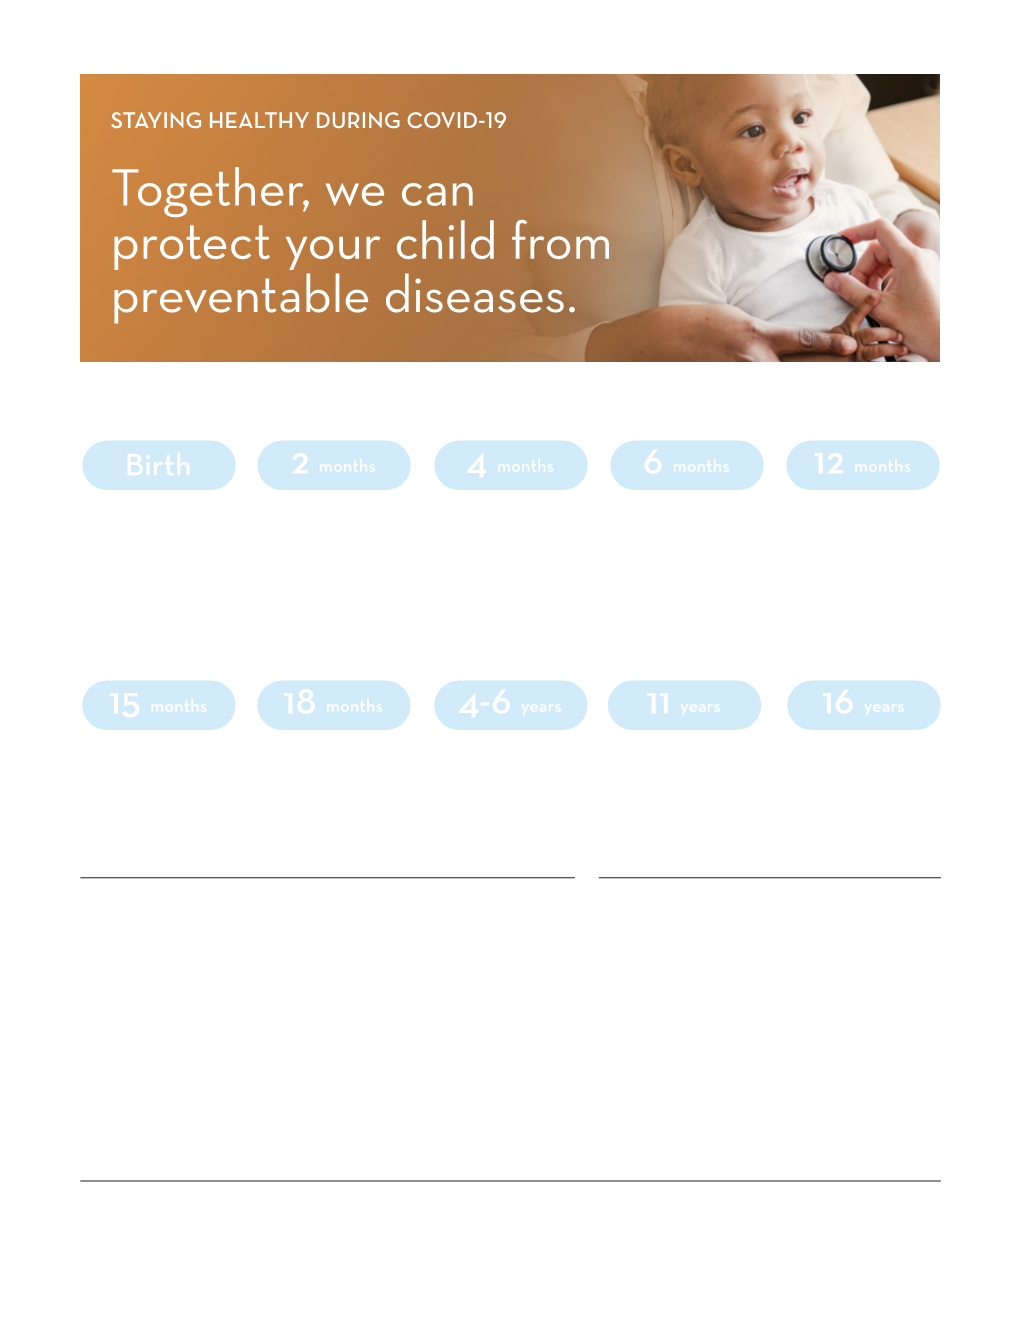 Together, We Can Protect Your Child from Preventable Diseases